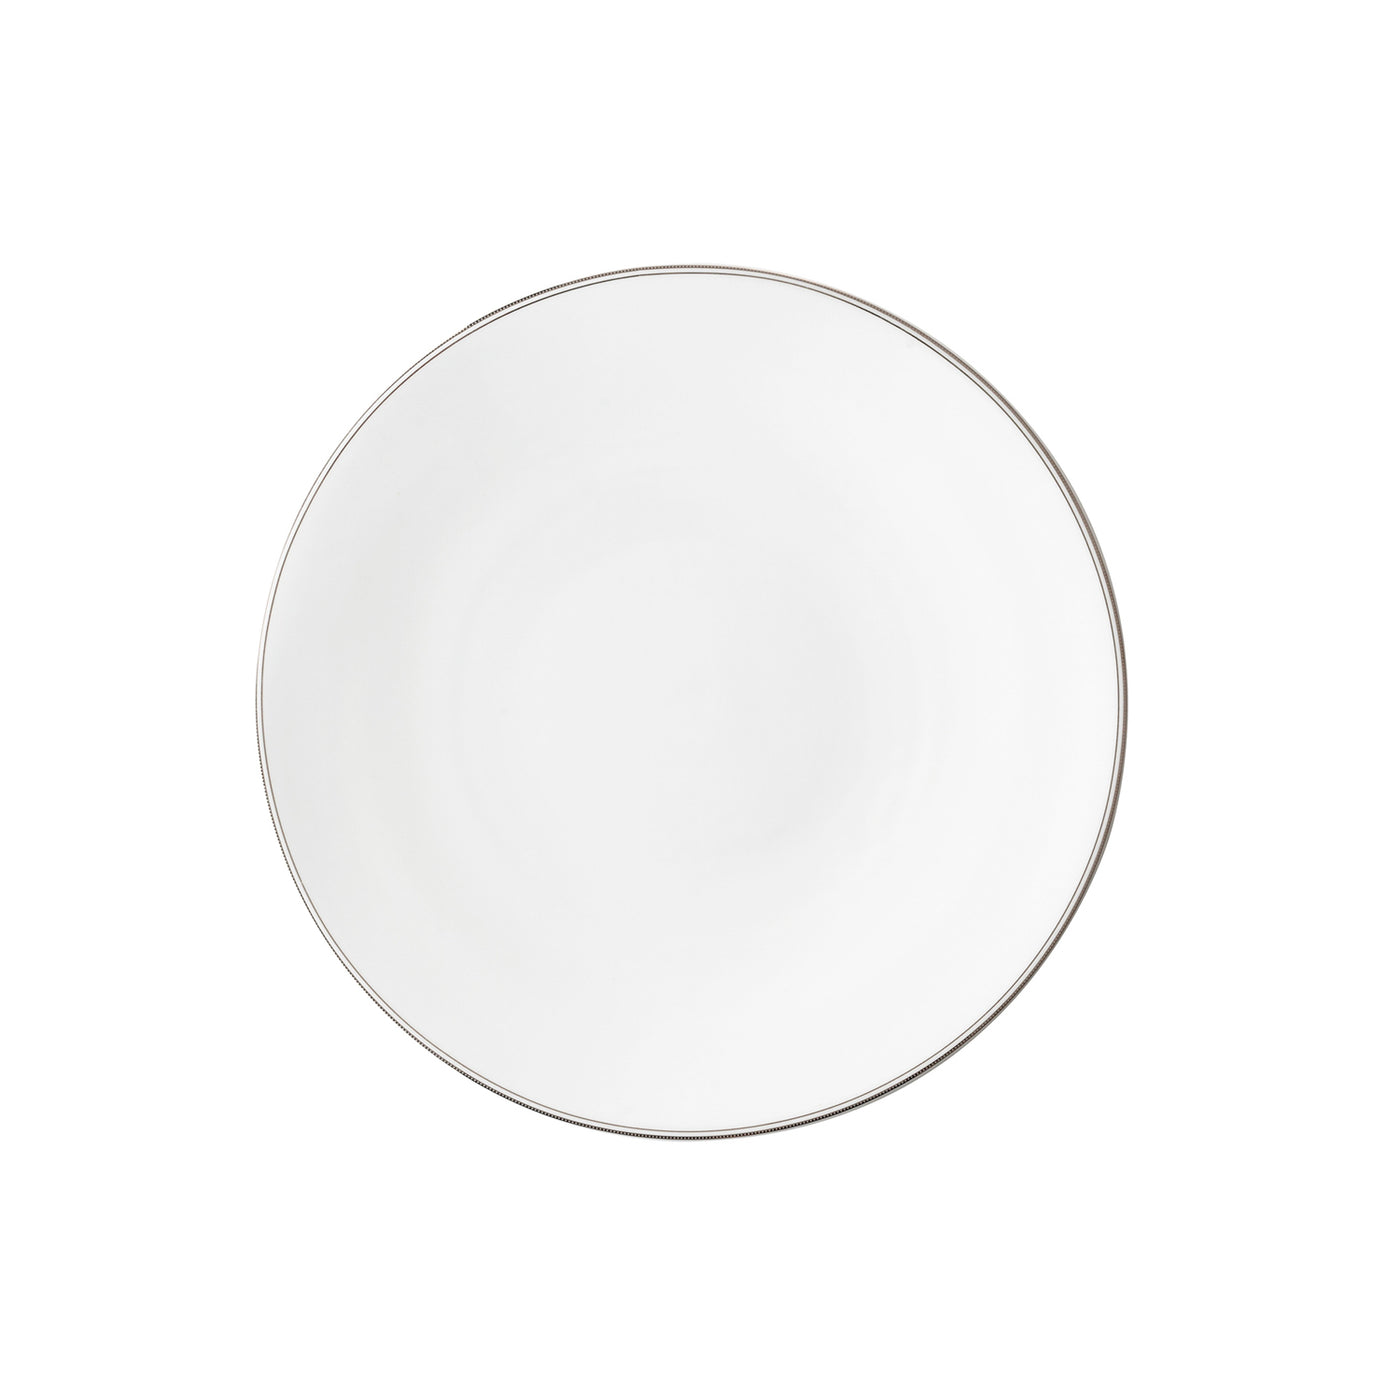 FNUGG set of two dinner plates 20 cm